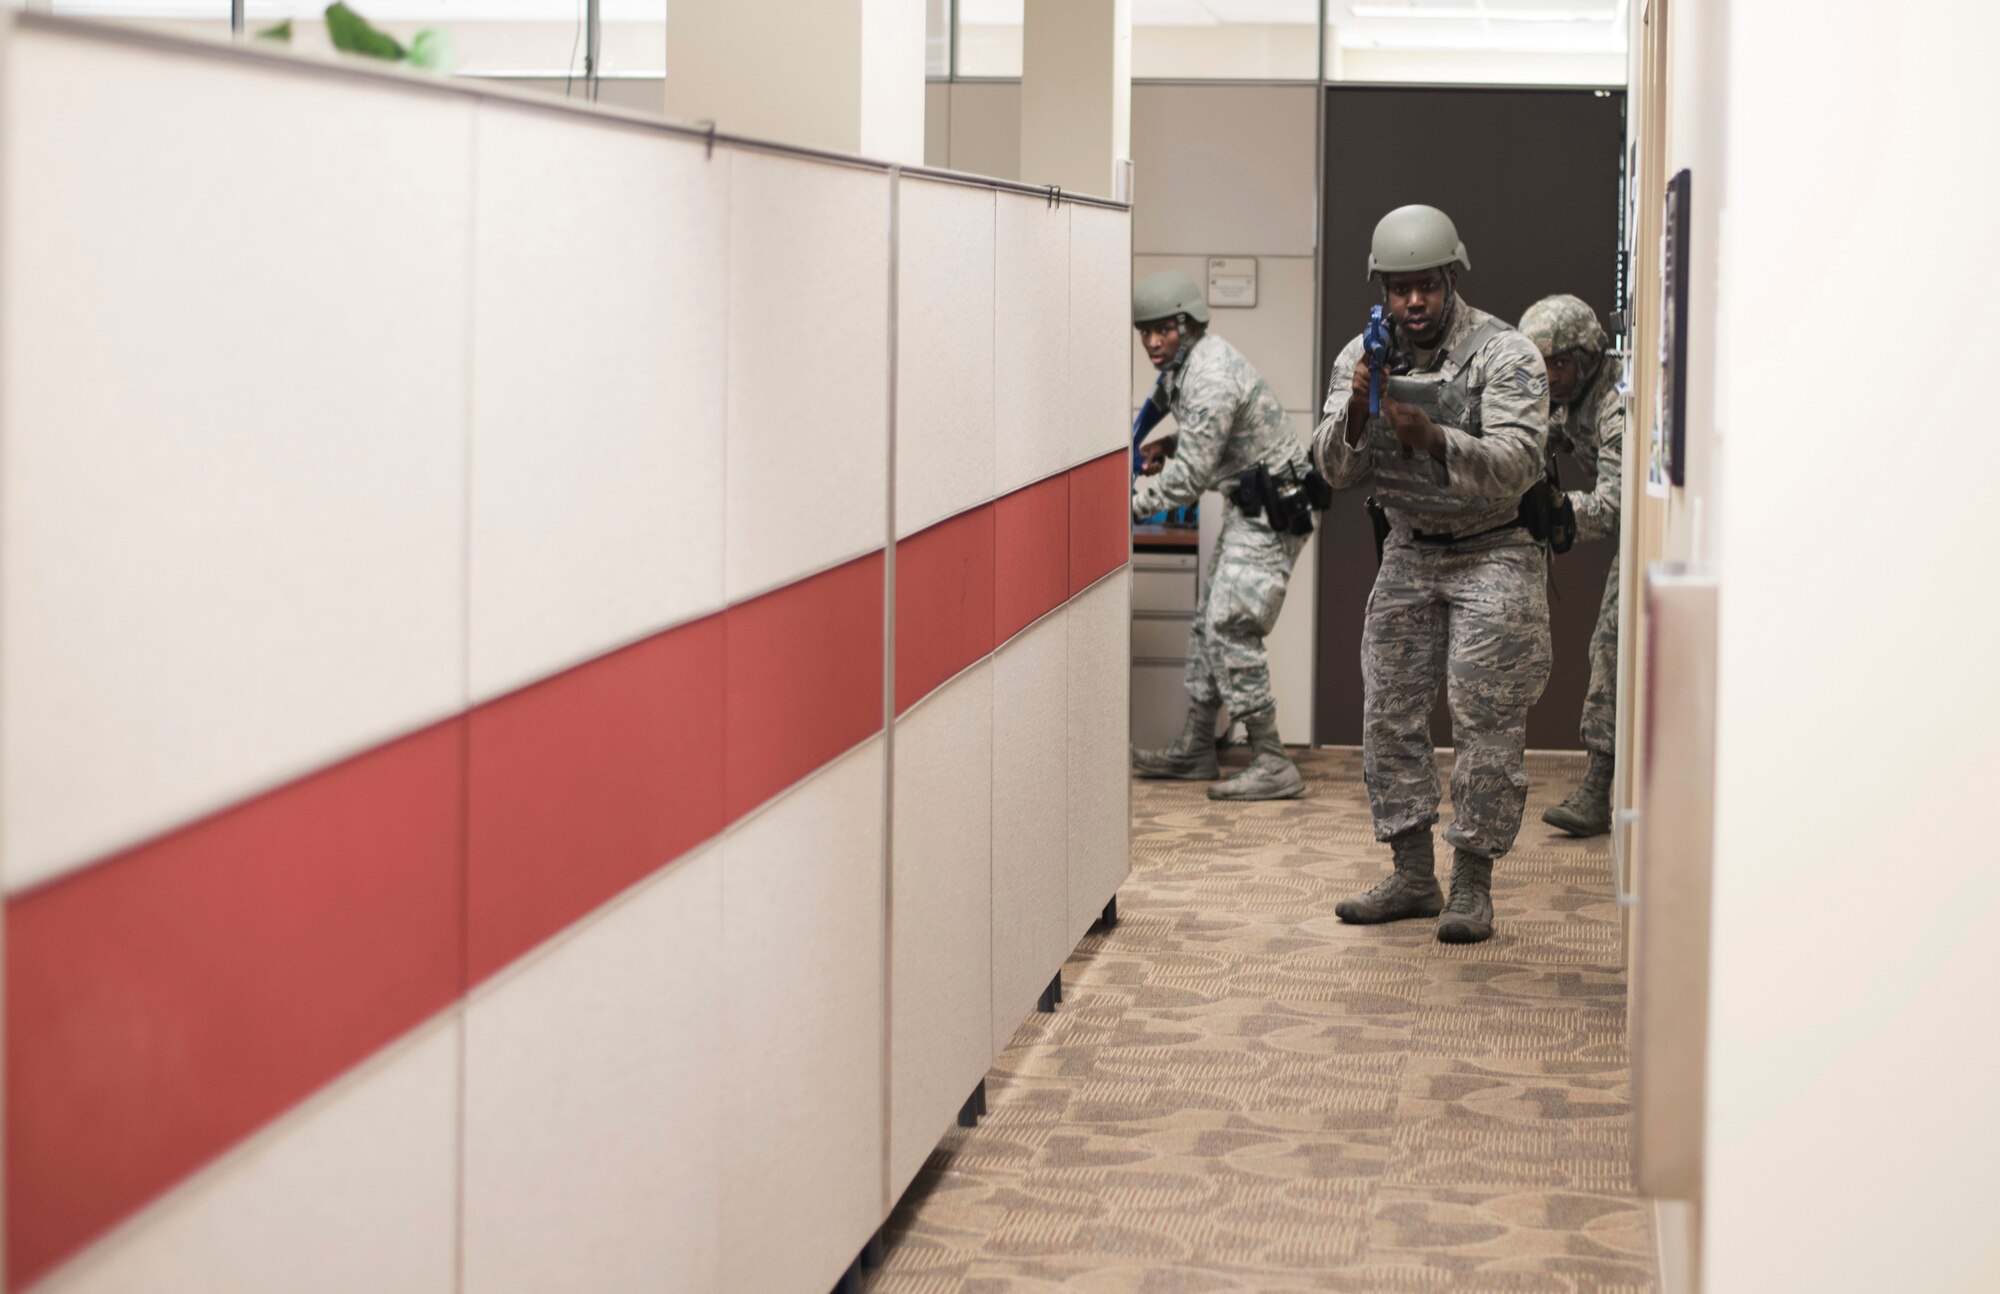 Airmen assigned to the 6th Security Forces Squadron conduct a sweep at the 927th Air Refueling Wing headquarters during an active shooter exercise at MacDill Air Force Base, Fla., April 17, 2017. During the sweep, the defenders searched for any other threats in the building (U.S. Air Force photo by Airman 1st Class Adam R. Shanks)